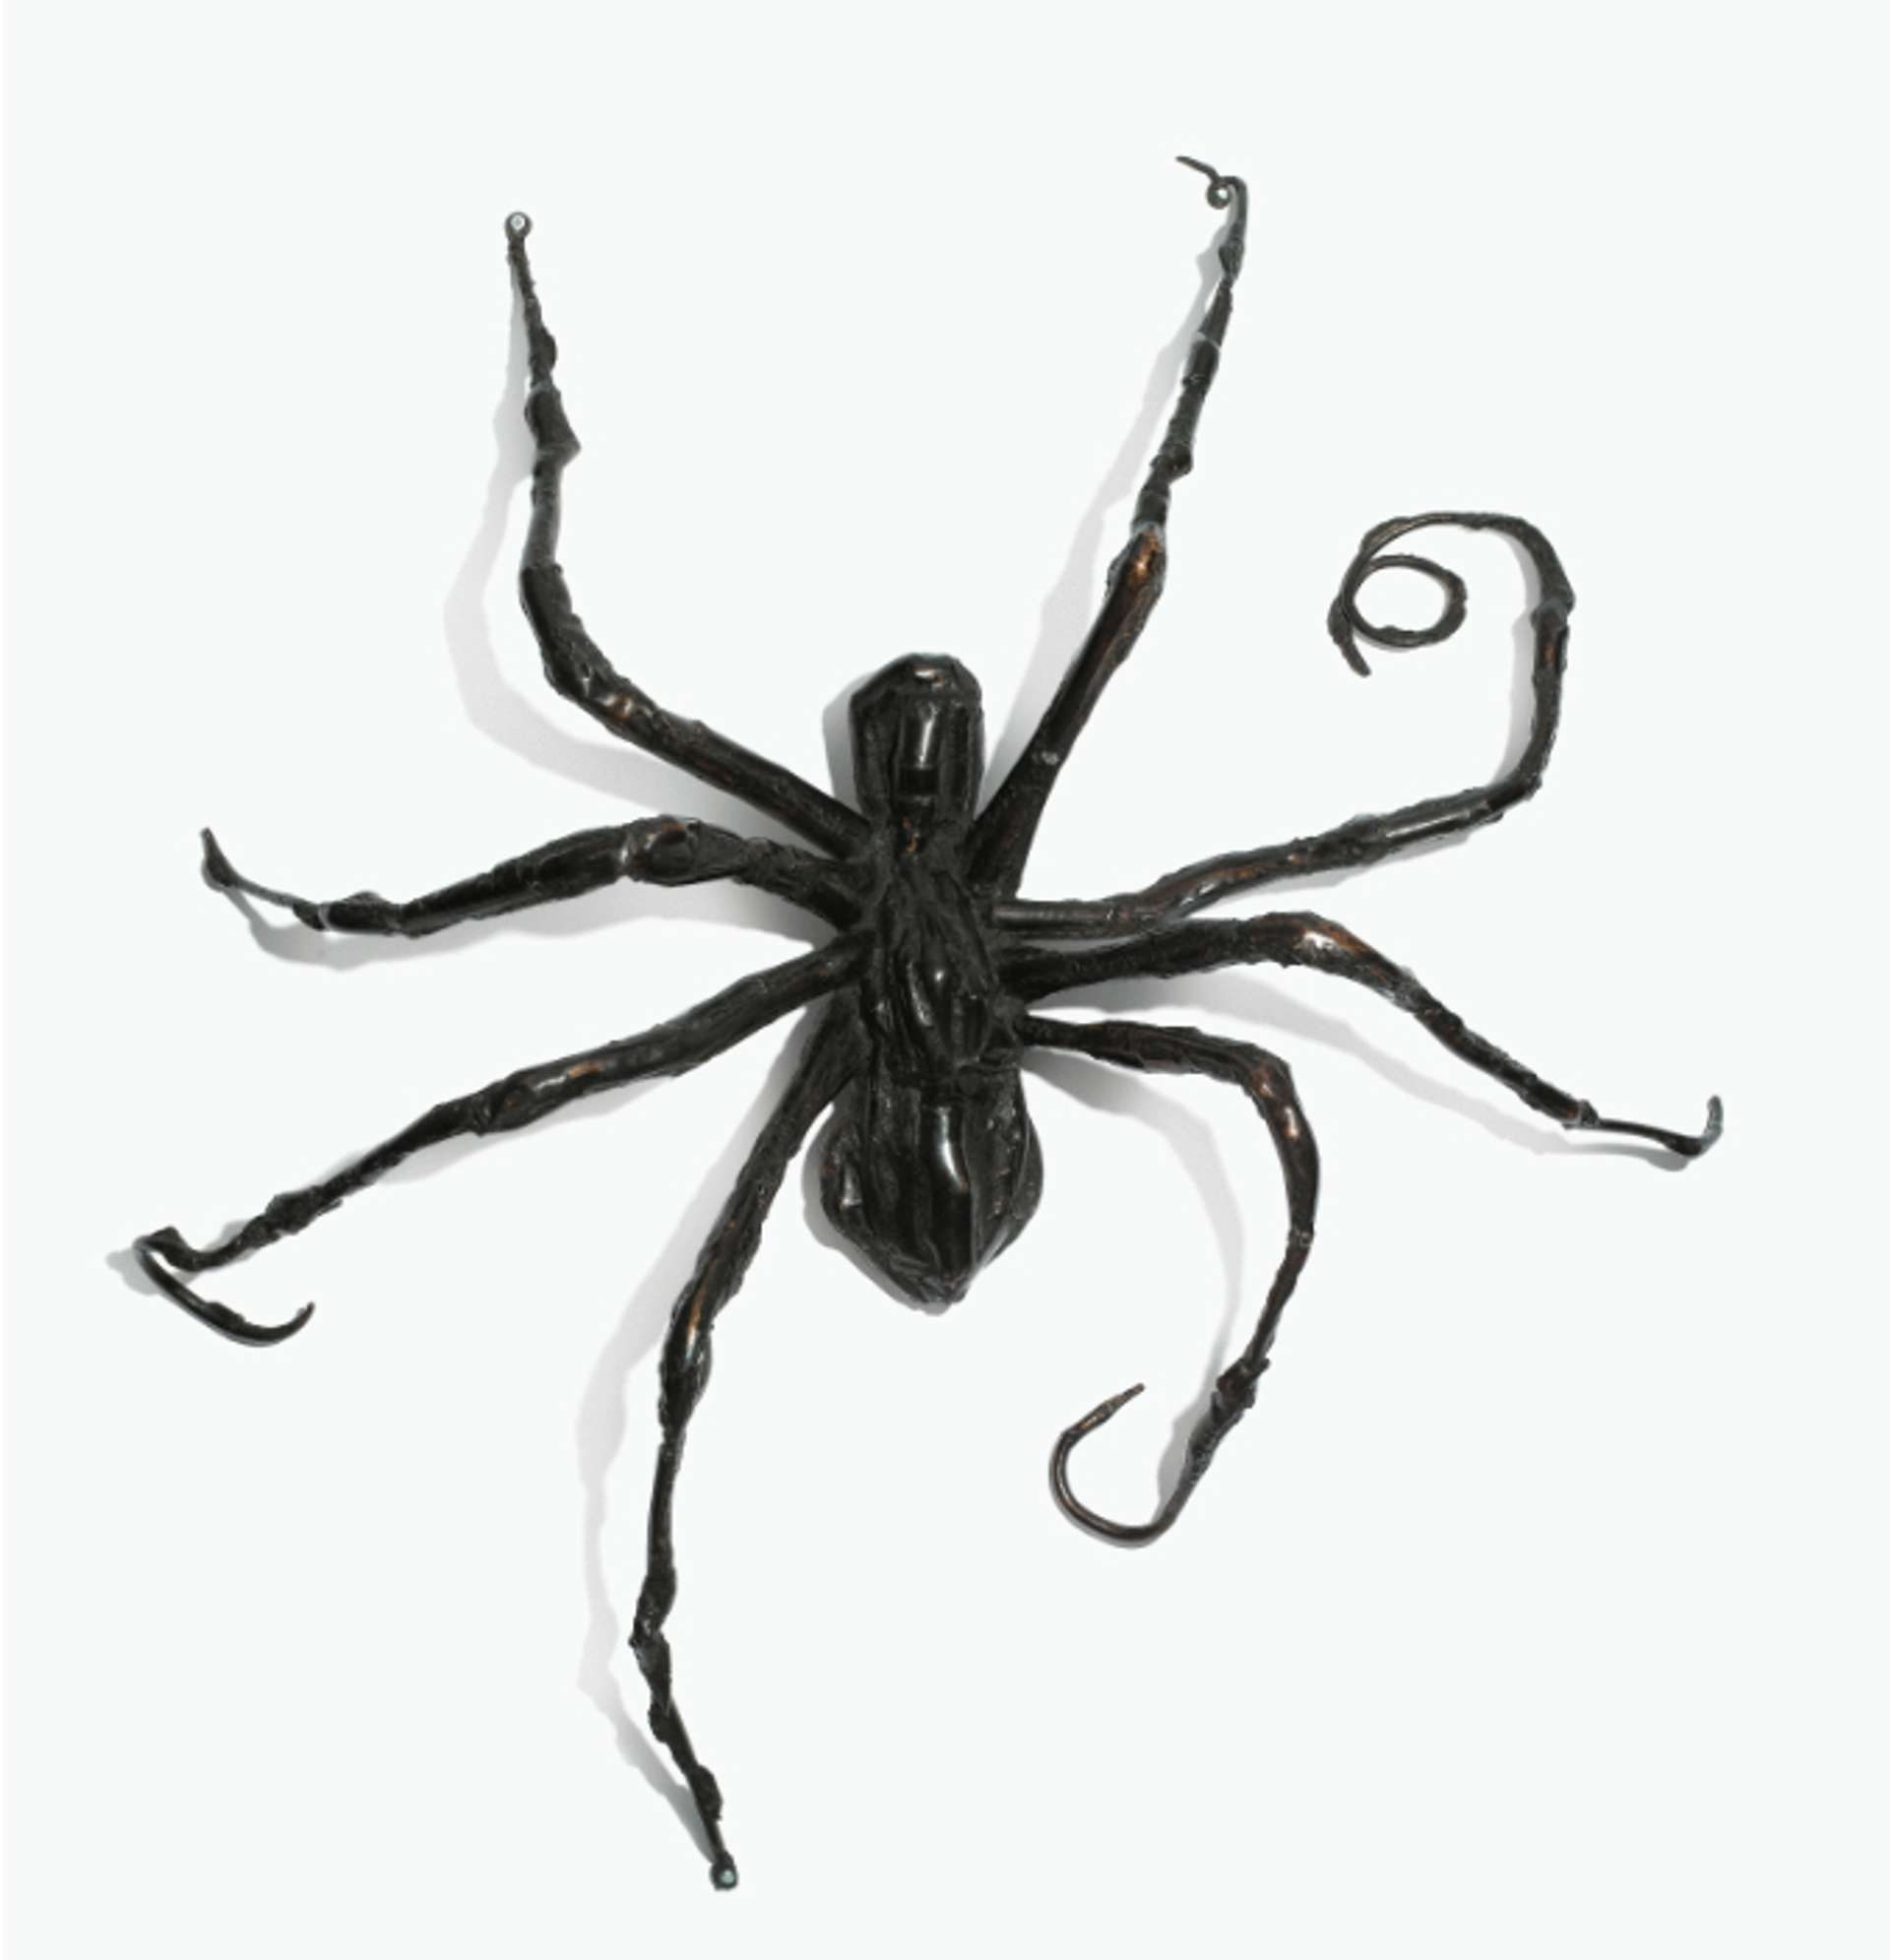 A wall relief spider sculpture climbing upwards, its eight limbs spread out, with two on the left slightly curled inward, conveying a sense of movement.